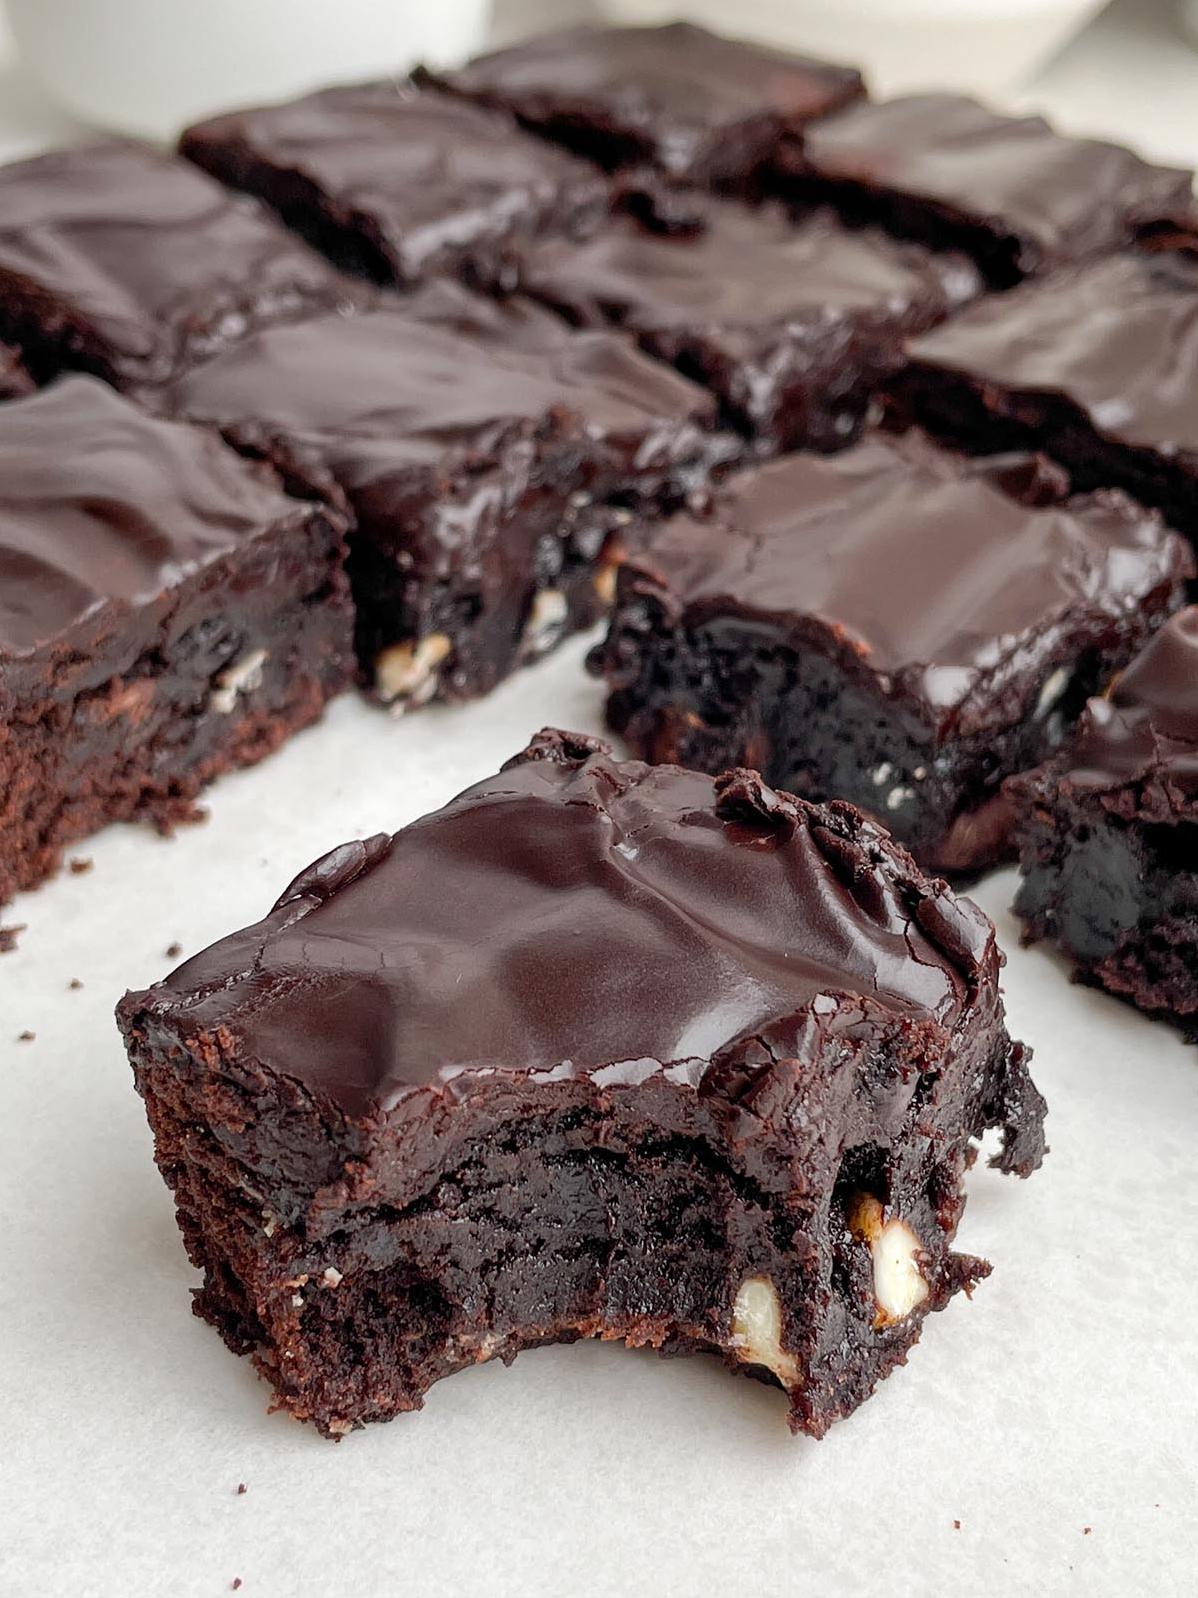  Indulge in a decadent treat with these Easy Frosted Dark Chocolate Brownies